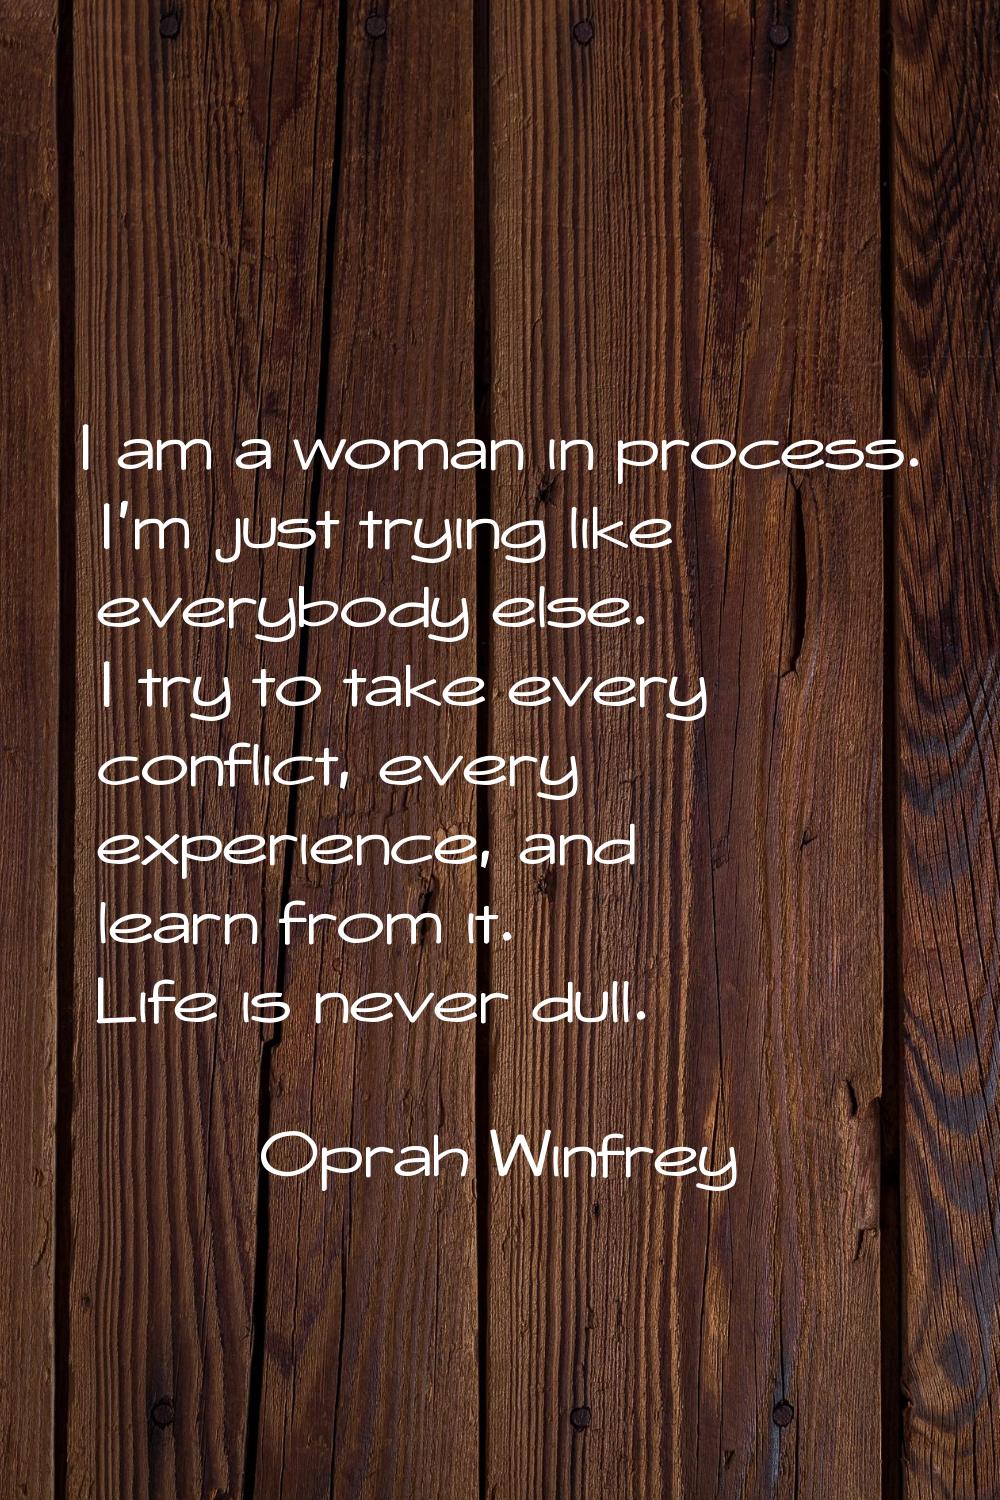 I am a woman in process. I'm just trying like everybody else. I try to take every conflict, every e